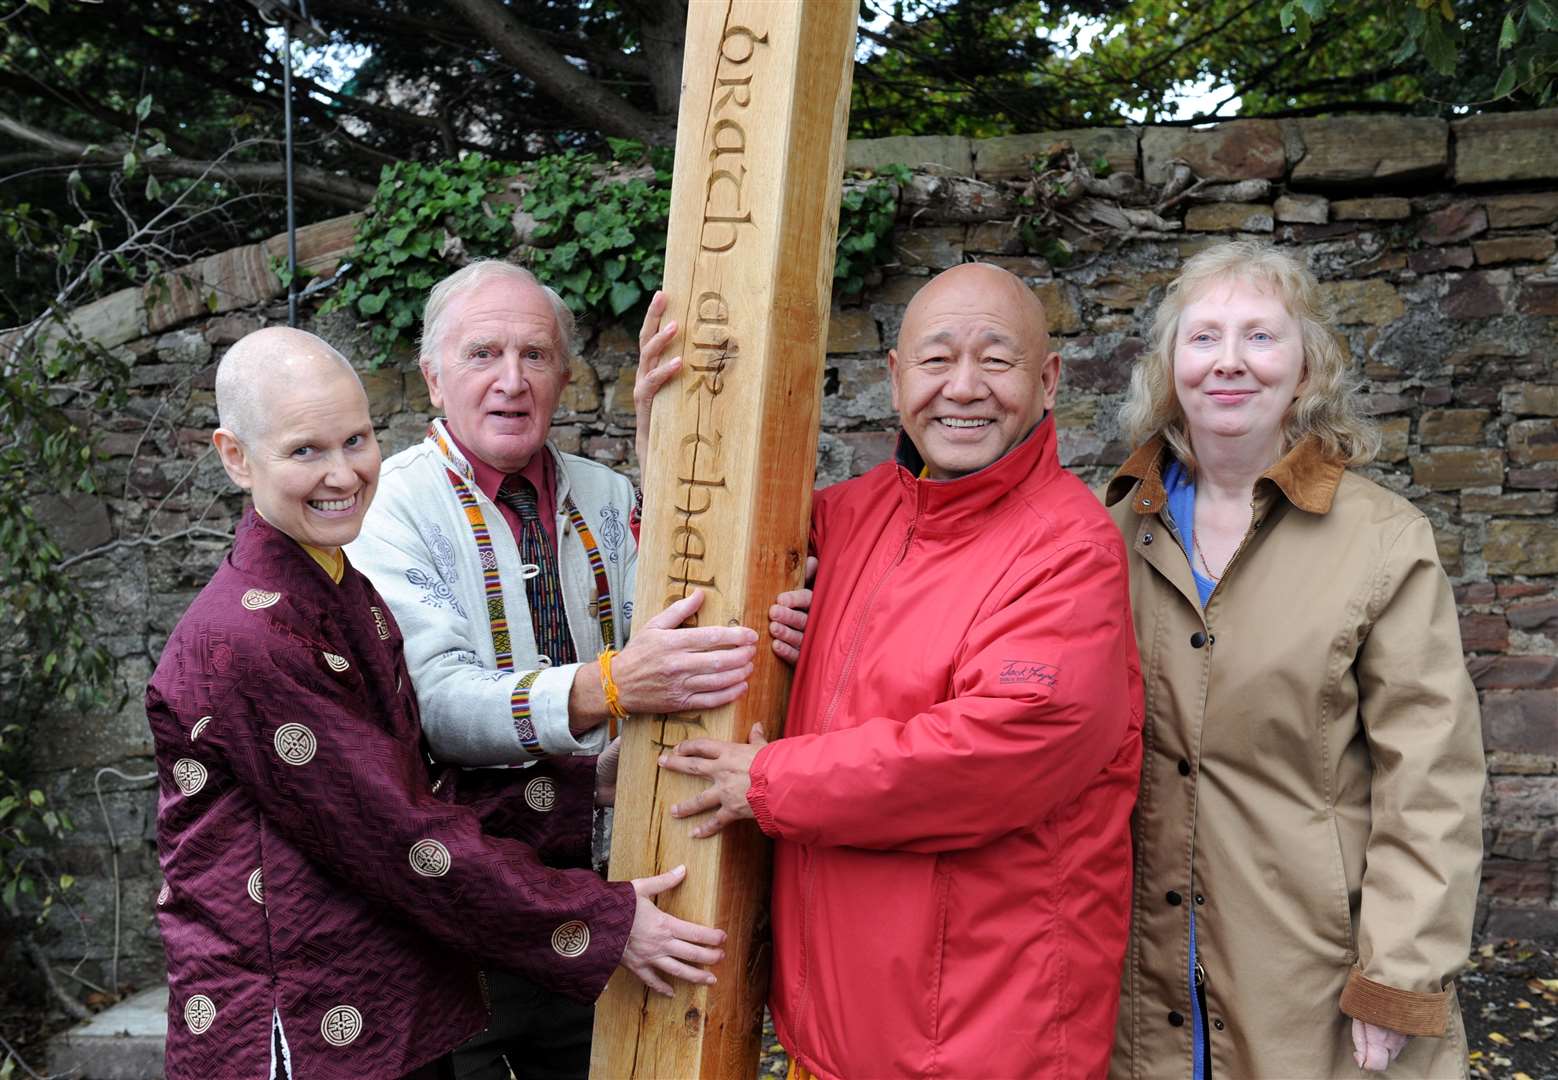 Lama Yeshe Rinpoche (in red), with a peace pole blessed by the Dalai Lama, aided by Ani Chamo (left) both from the Sanye Ling Monatery, Dumfries, with Hamish Wood and Helen MacRae of the peace centre, Drumnadrochit.